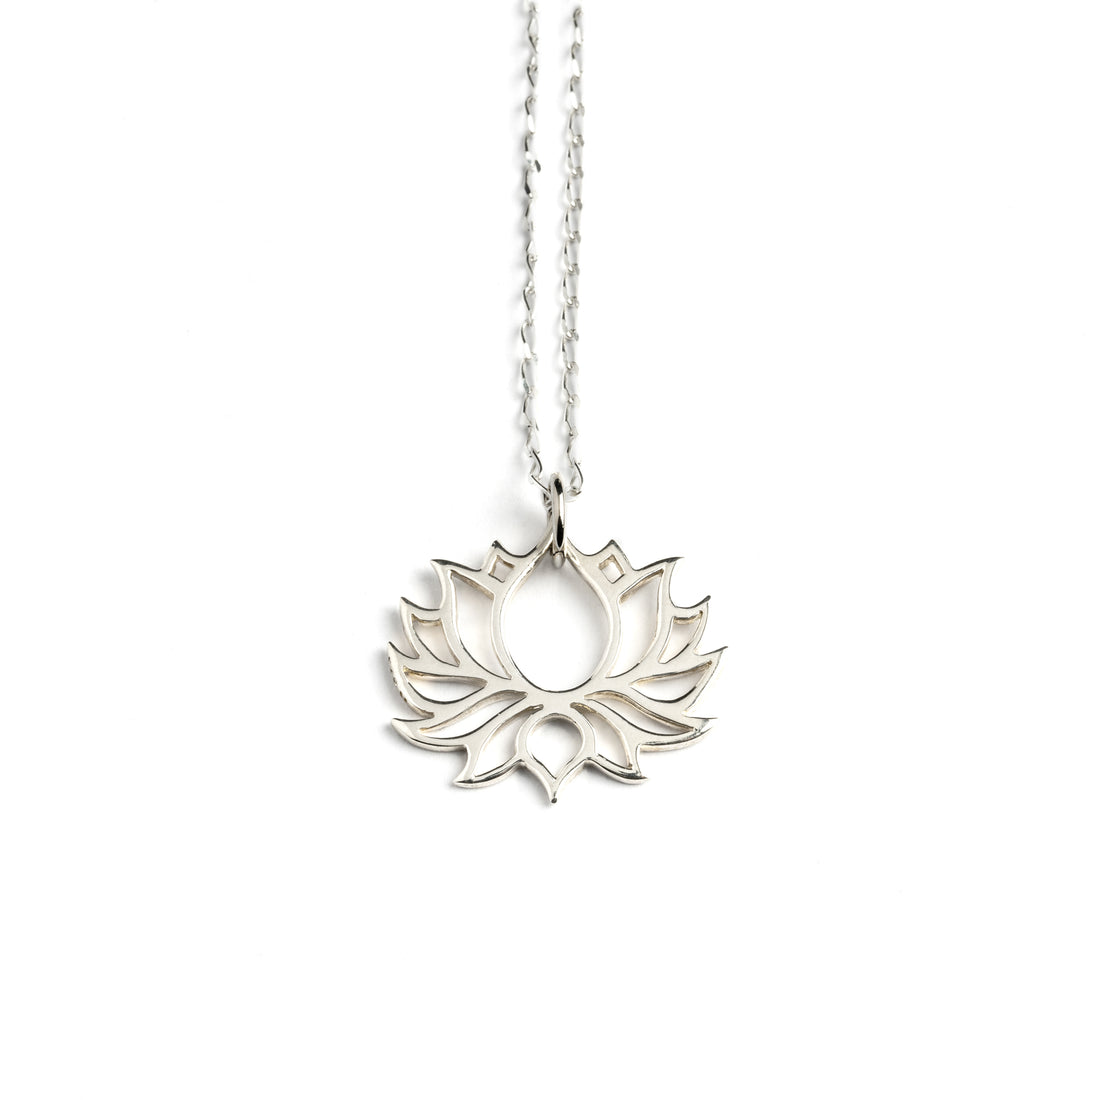 Silver Lotus Flower Outline Charm necklace frontal view